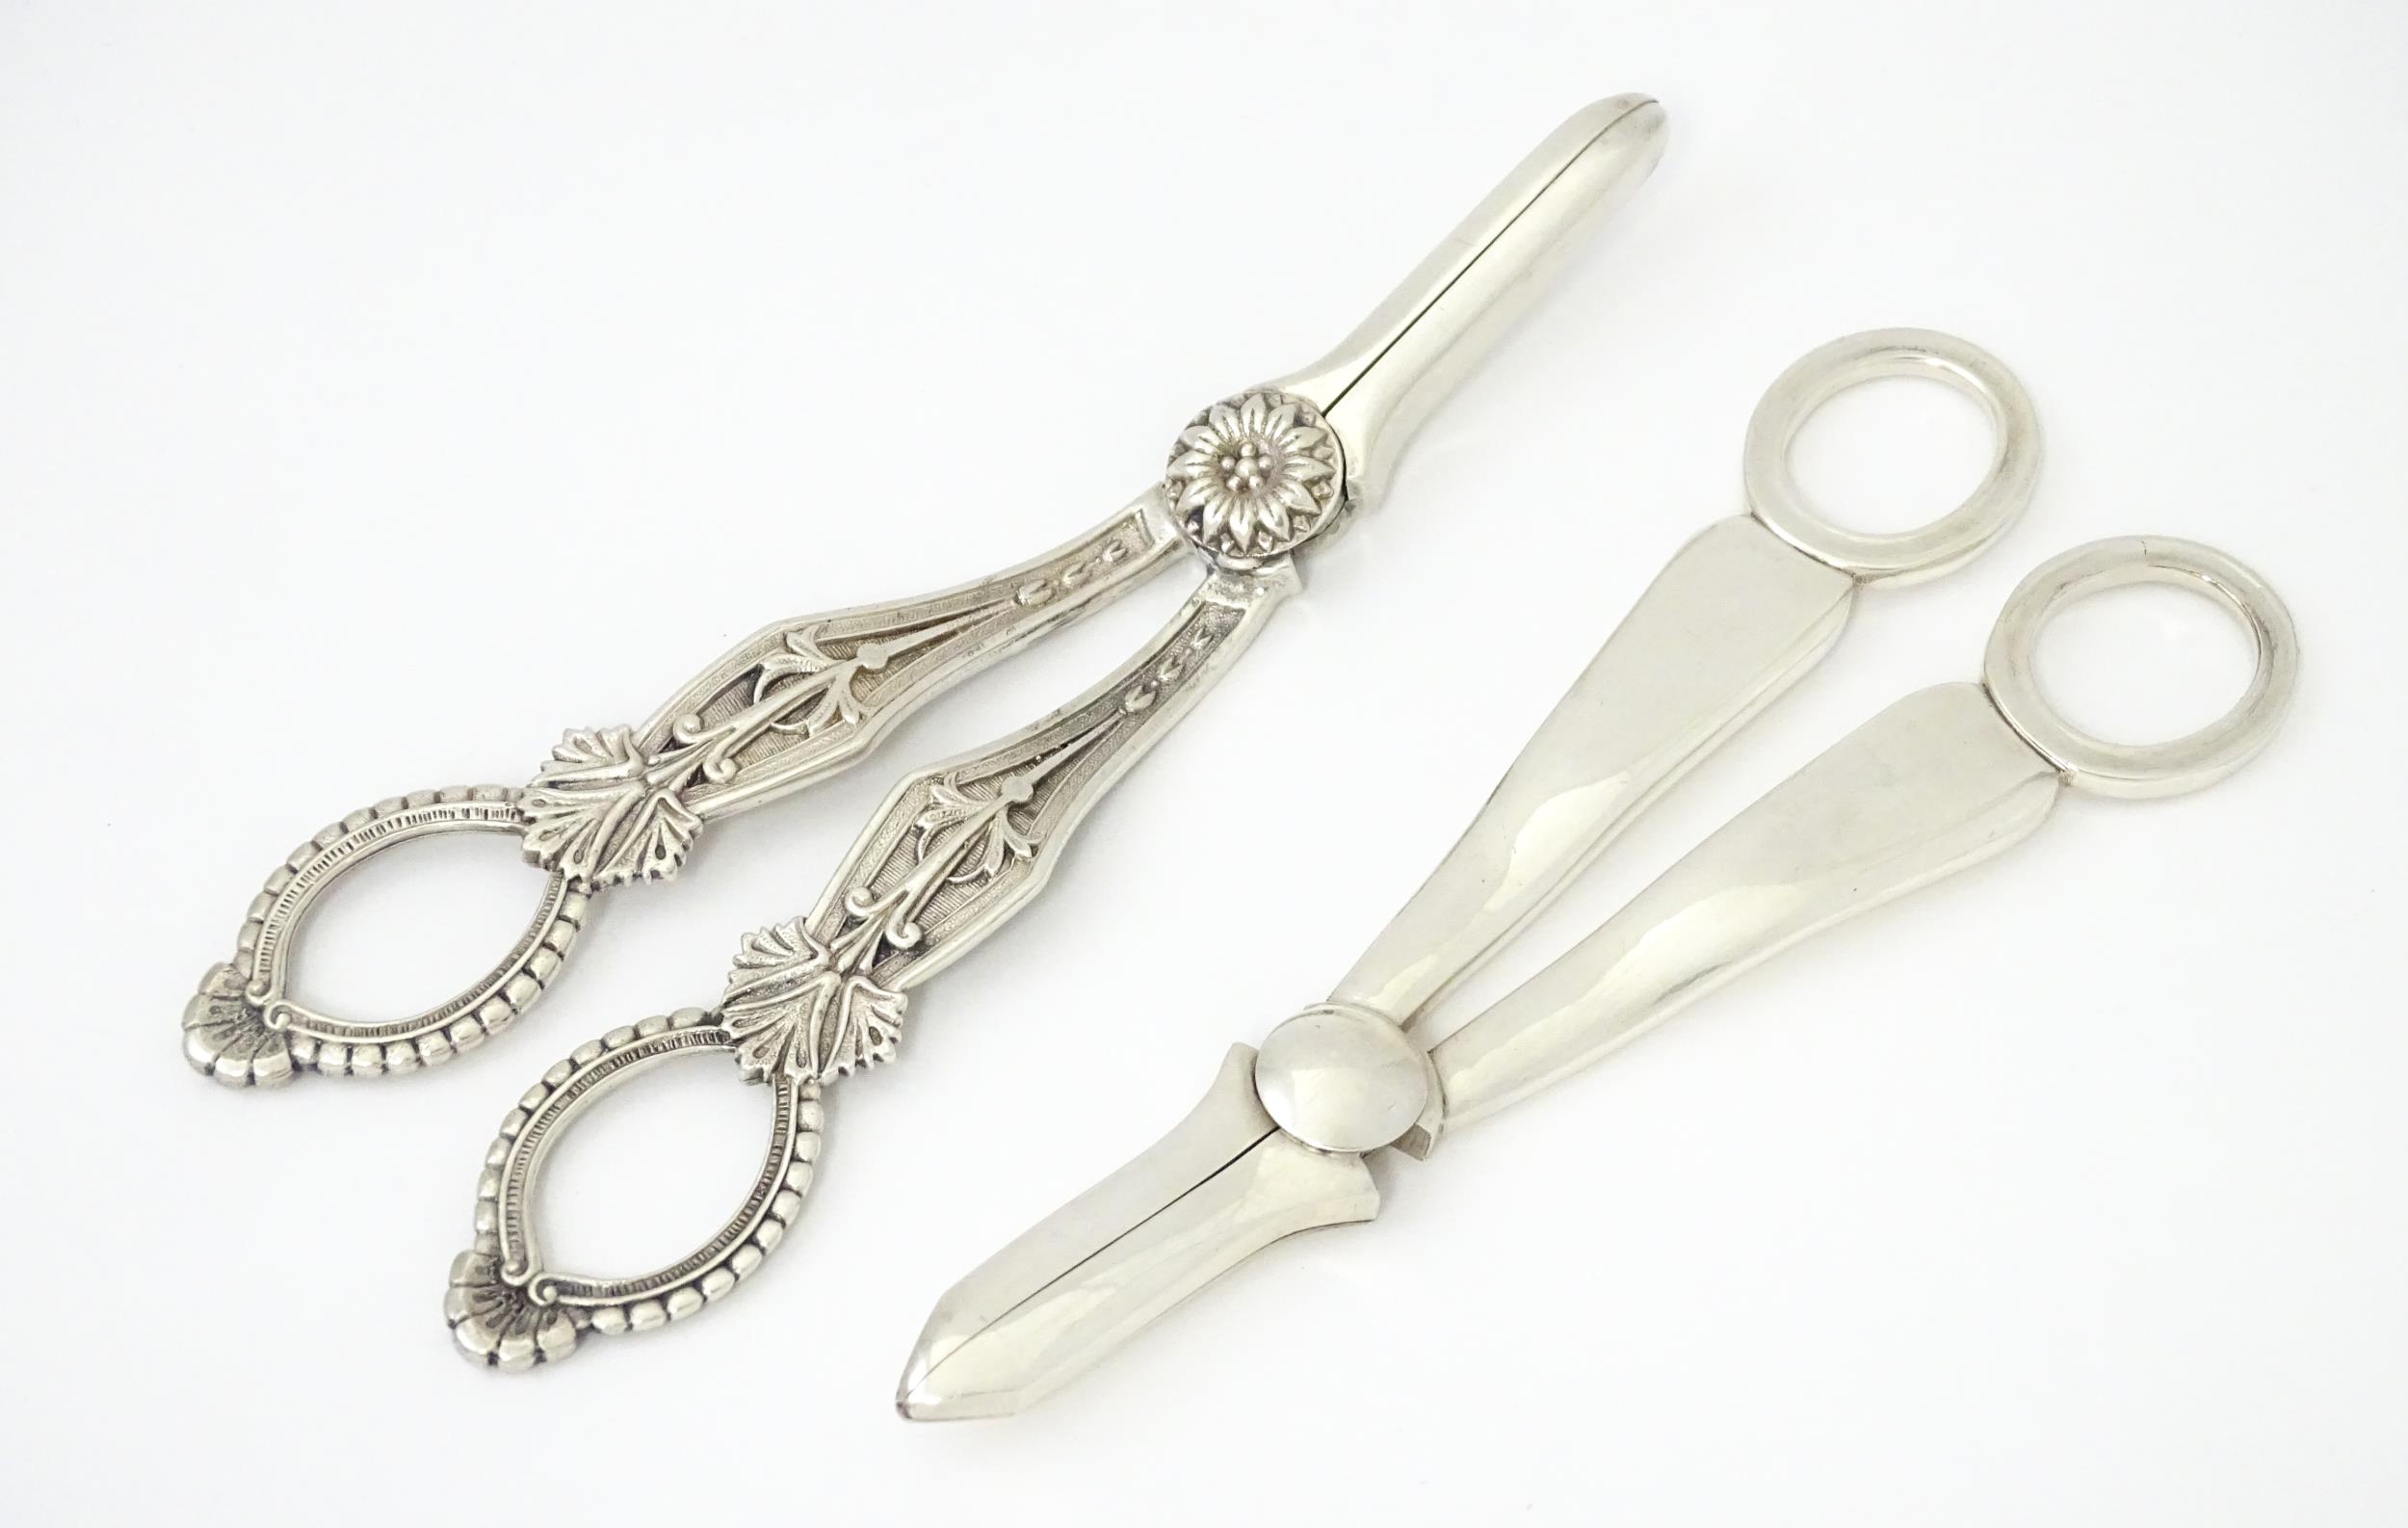 Two silver plate grape scissors / shears. Approx 6 1/2" long Please Note - we do not make